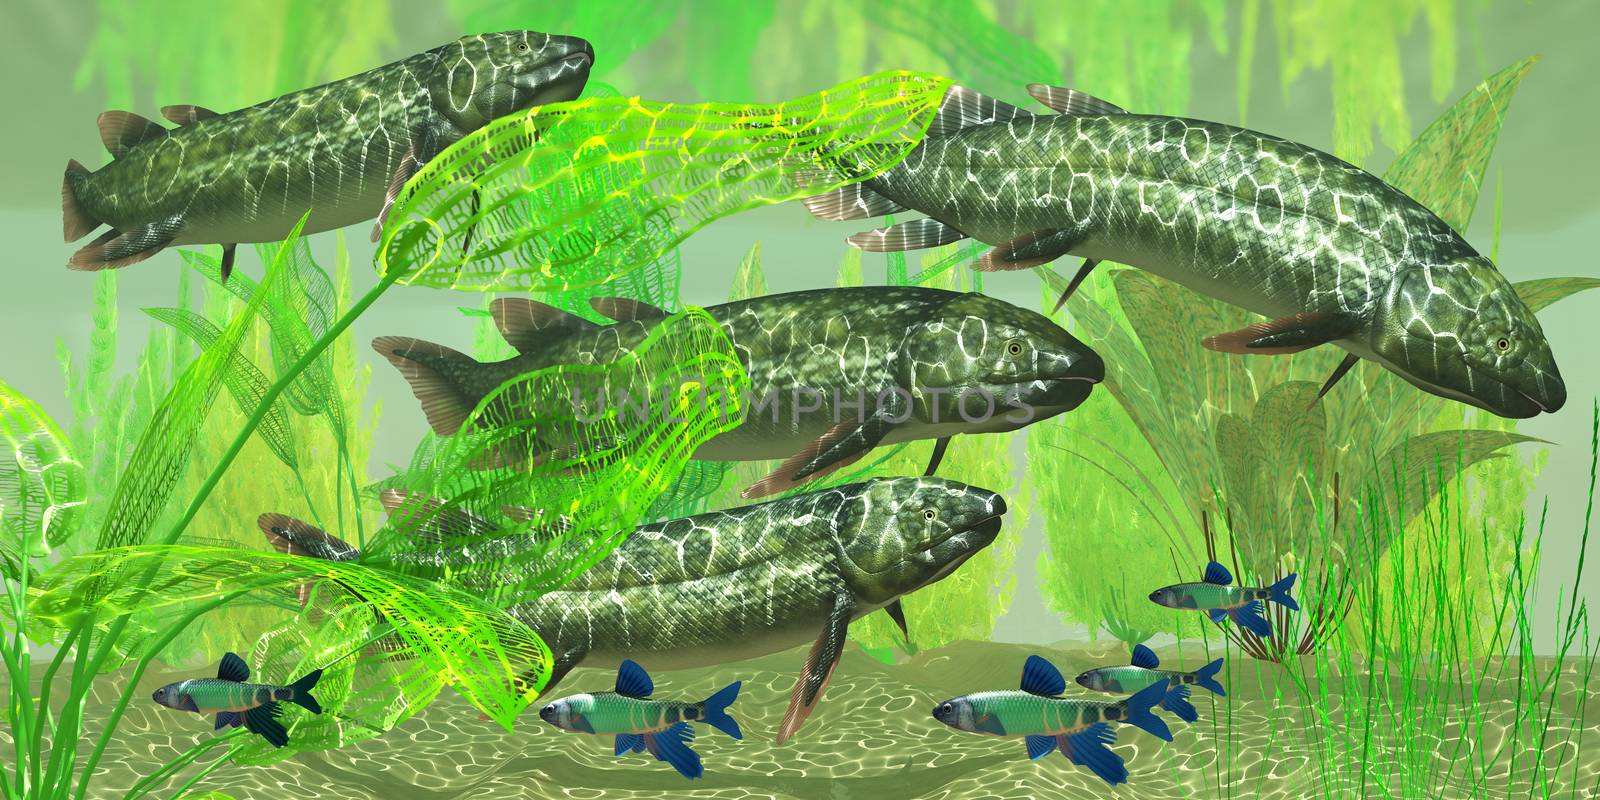 Dipterus is an extinct freshwater lungfish from the Devonian Period of Australia and Europe.